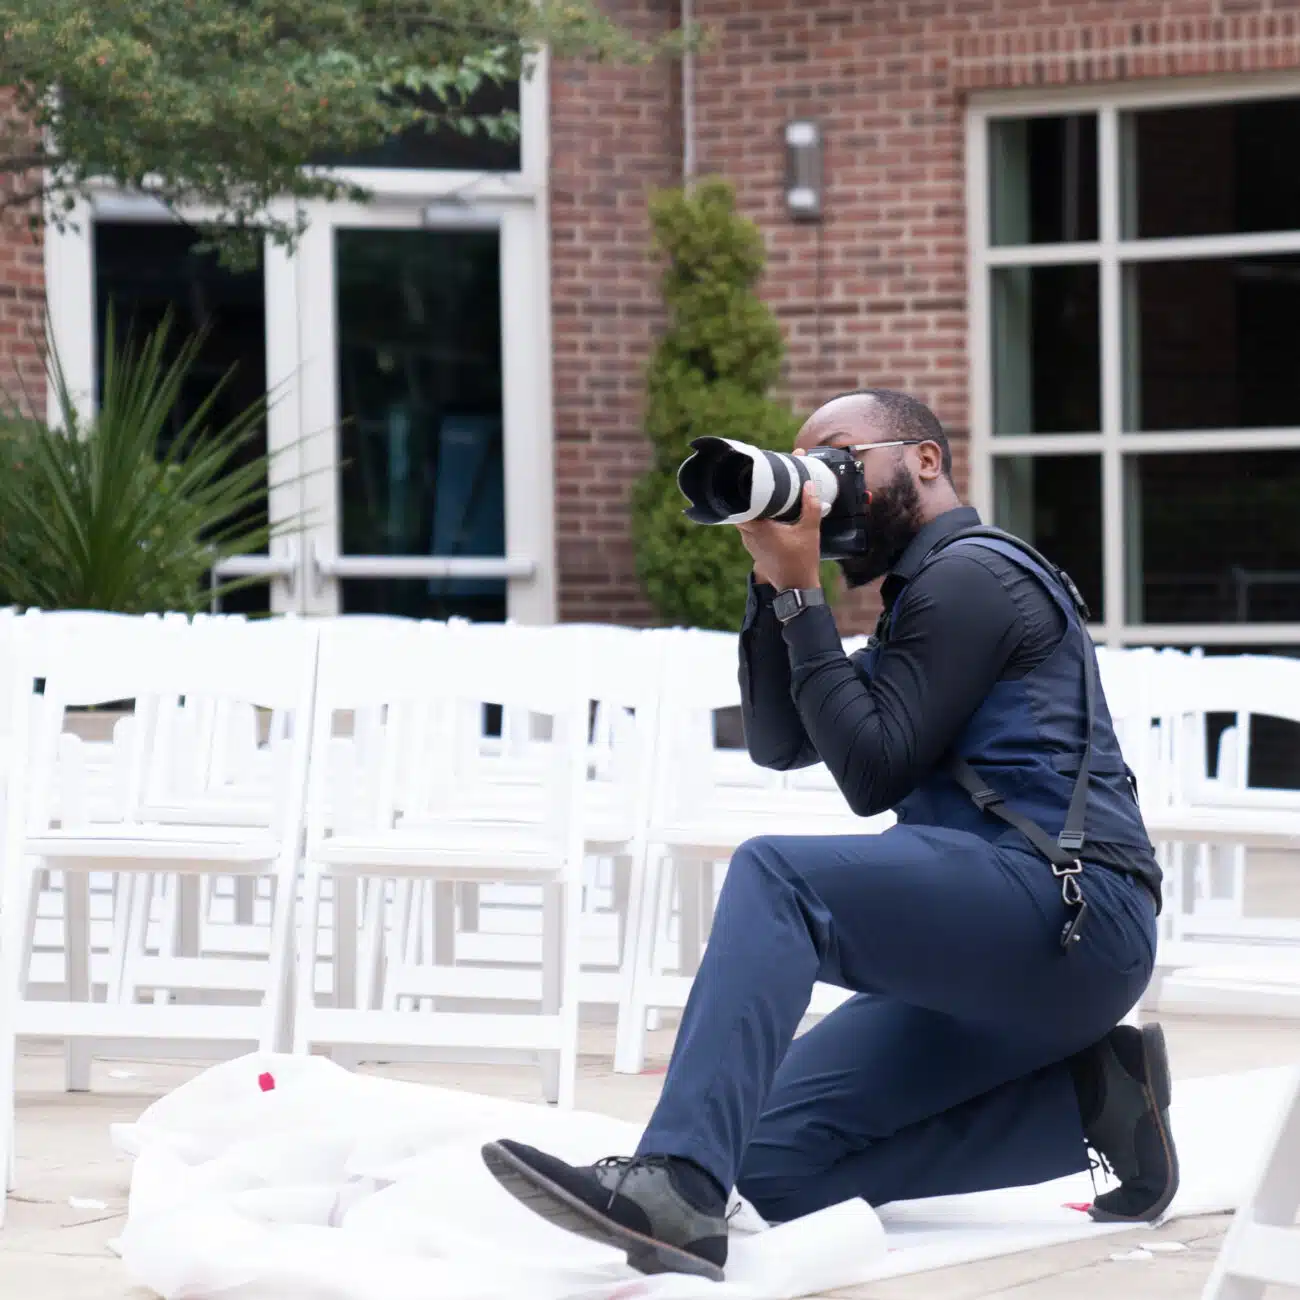 Dontavious Chesson, getting into position to capture the wedding party images in the Charolotte NC wedding Venue location.